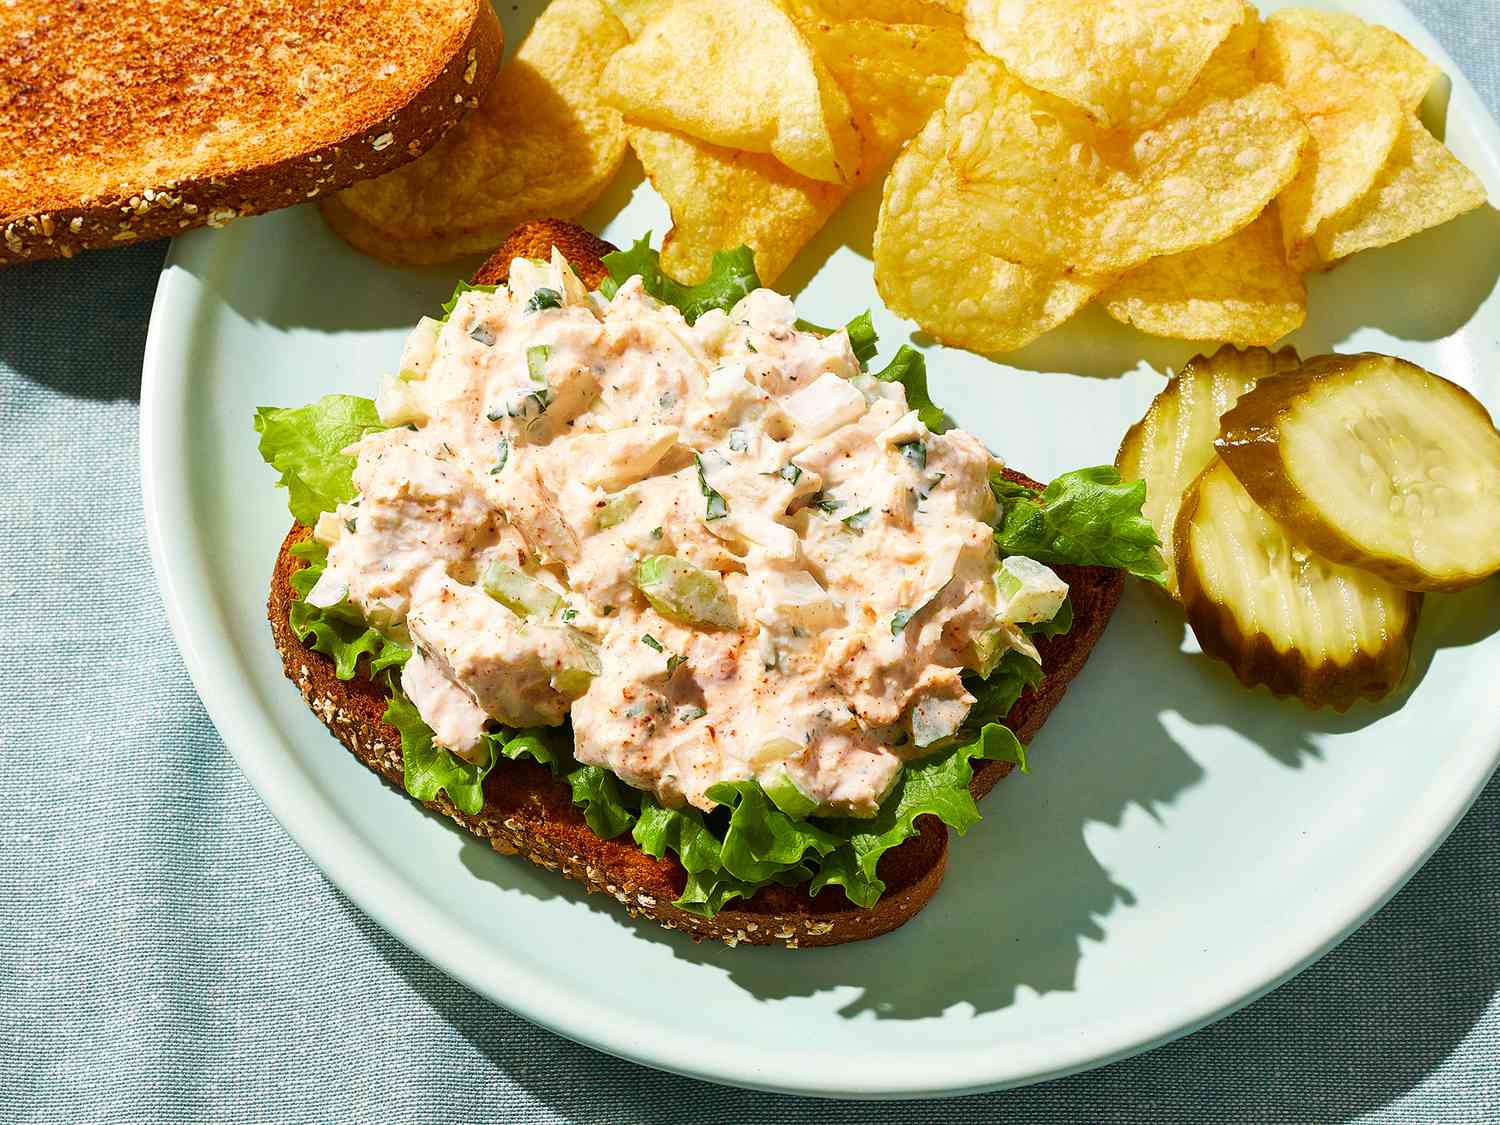 Is Tuna Salad a Nutrient-Packed Option for Senior Health?